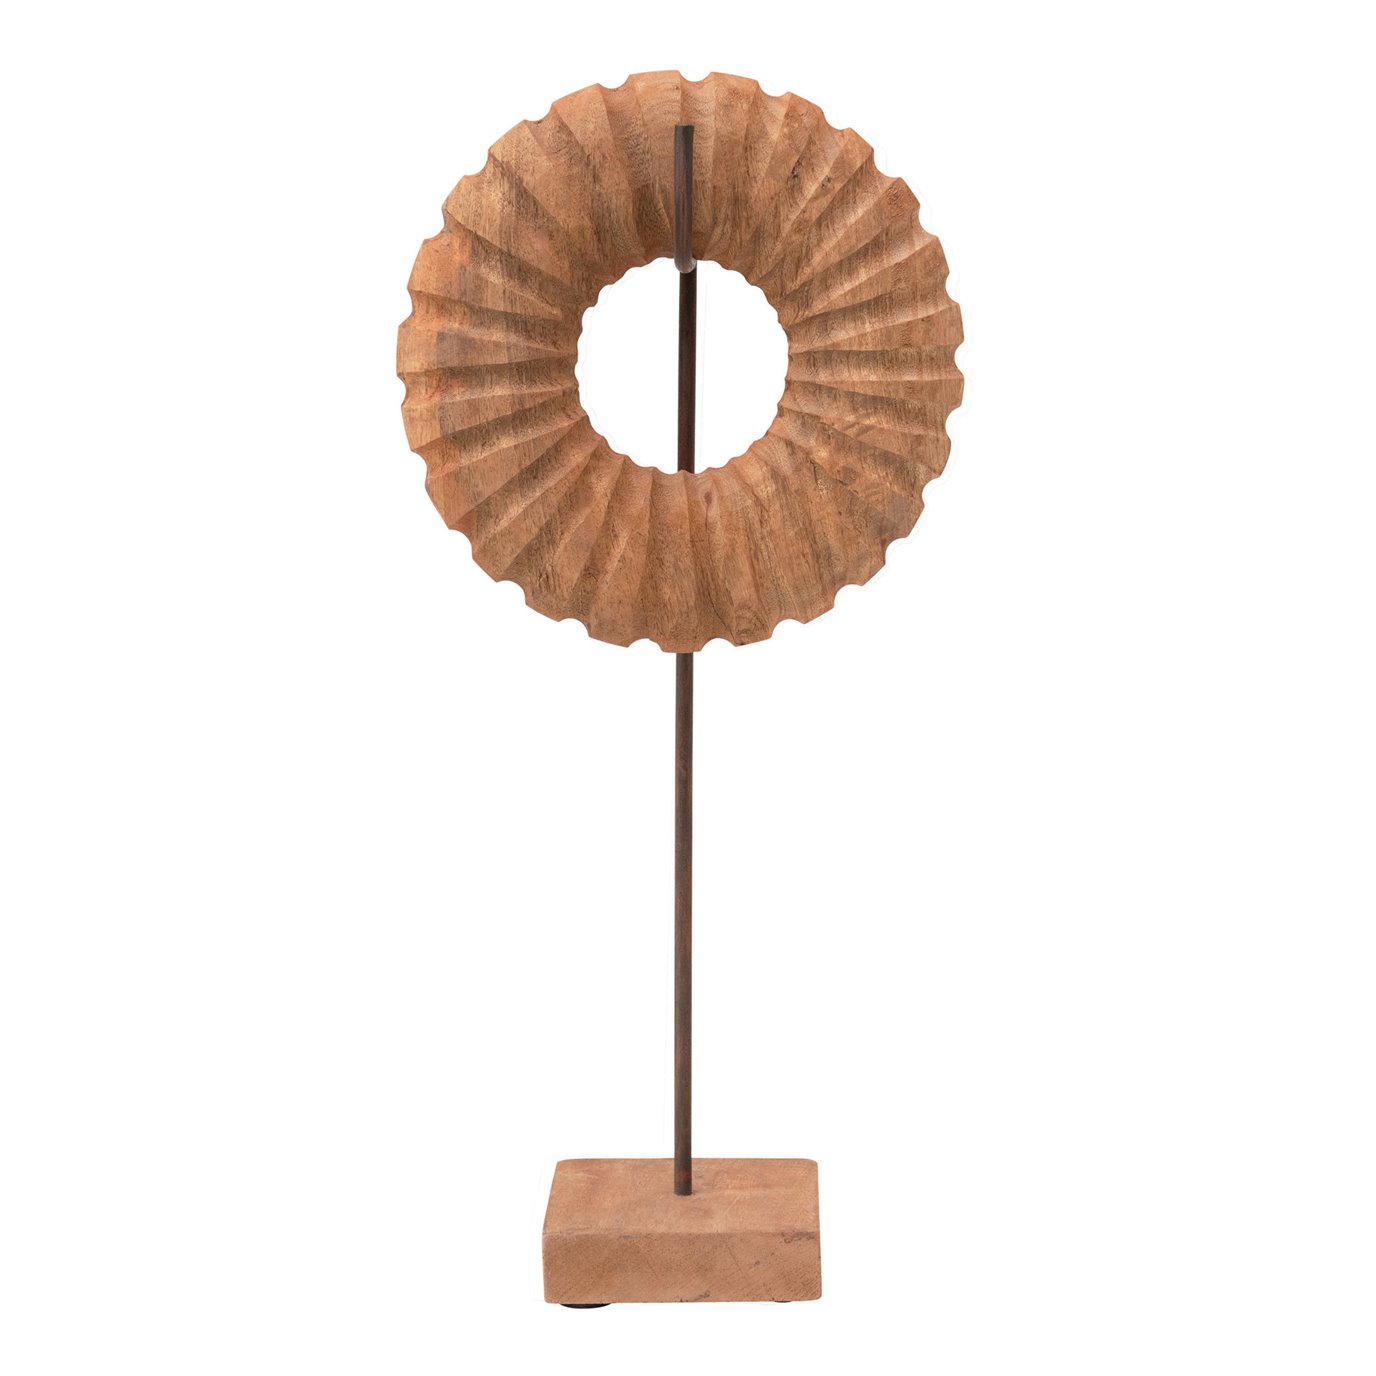 Hand-Carved Mango Wood Circle Object on Metal & Wood Stand, Set of 2